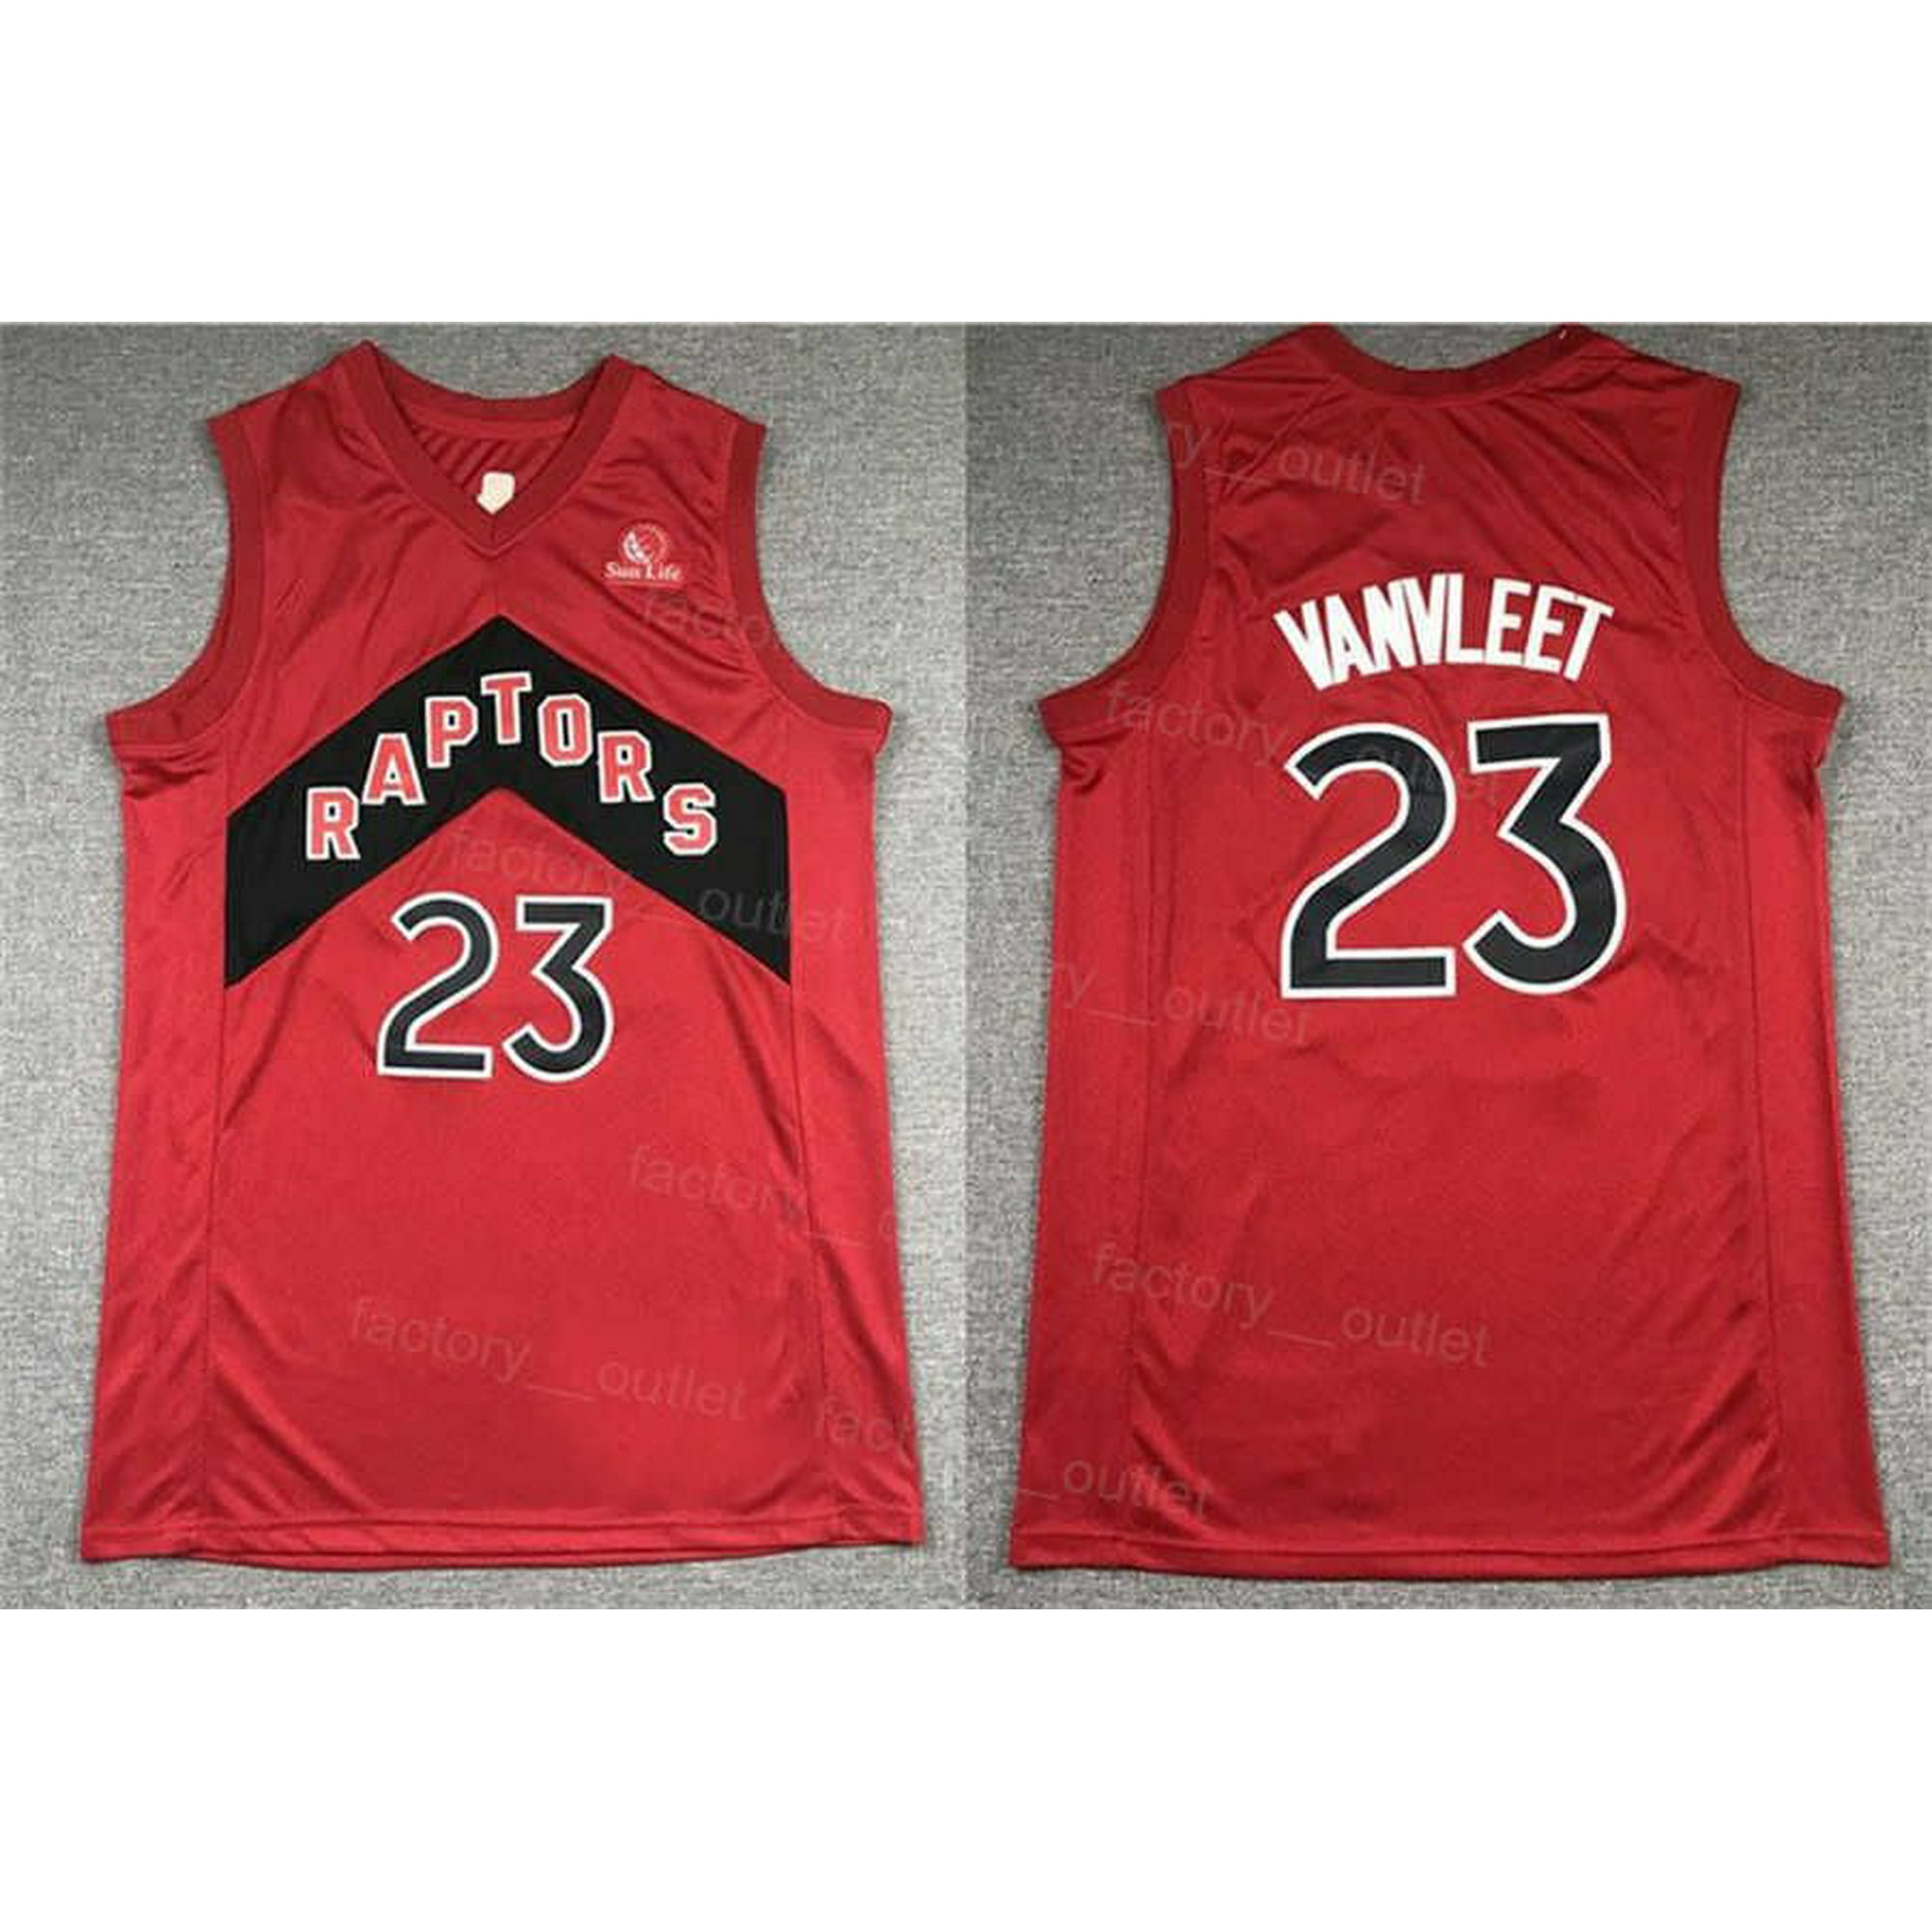 NBA_ Men Basketball Pascal Siakam Jersey 43 Fred VanVleet 23 Team Black Red  White Color All Stitched For Sport Fans Breathable P''nba''jerseys 